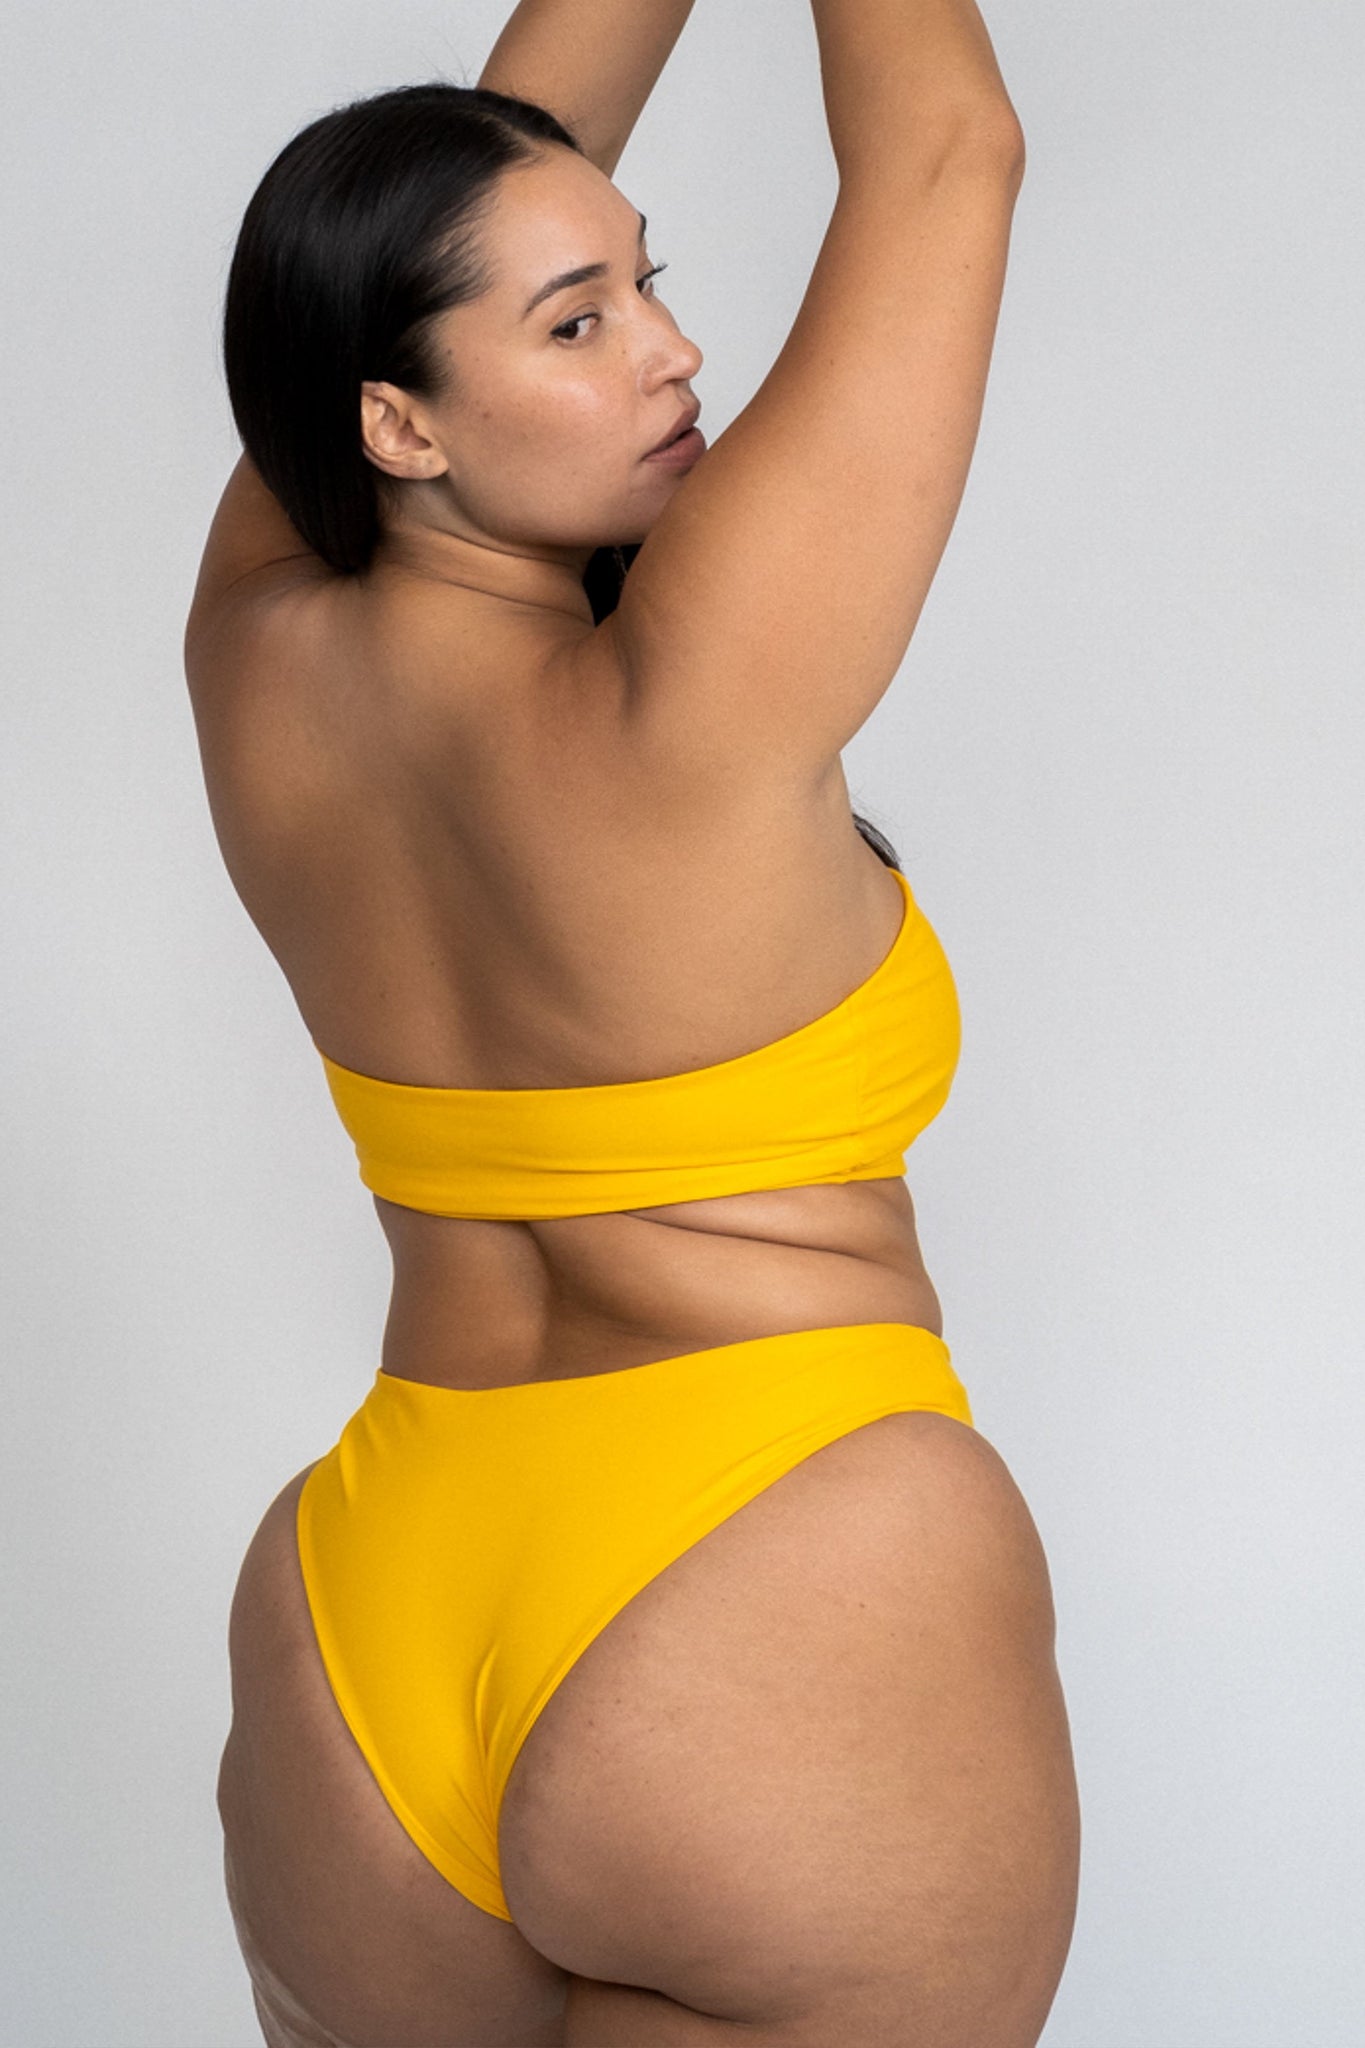 The back of a woman standing looking over her shoulder wearing yellow high cut bikini bottoms with a matching yellow strapless bandeau bikini top.